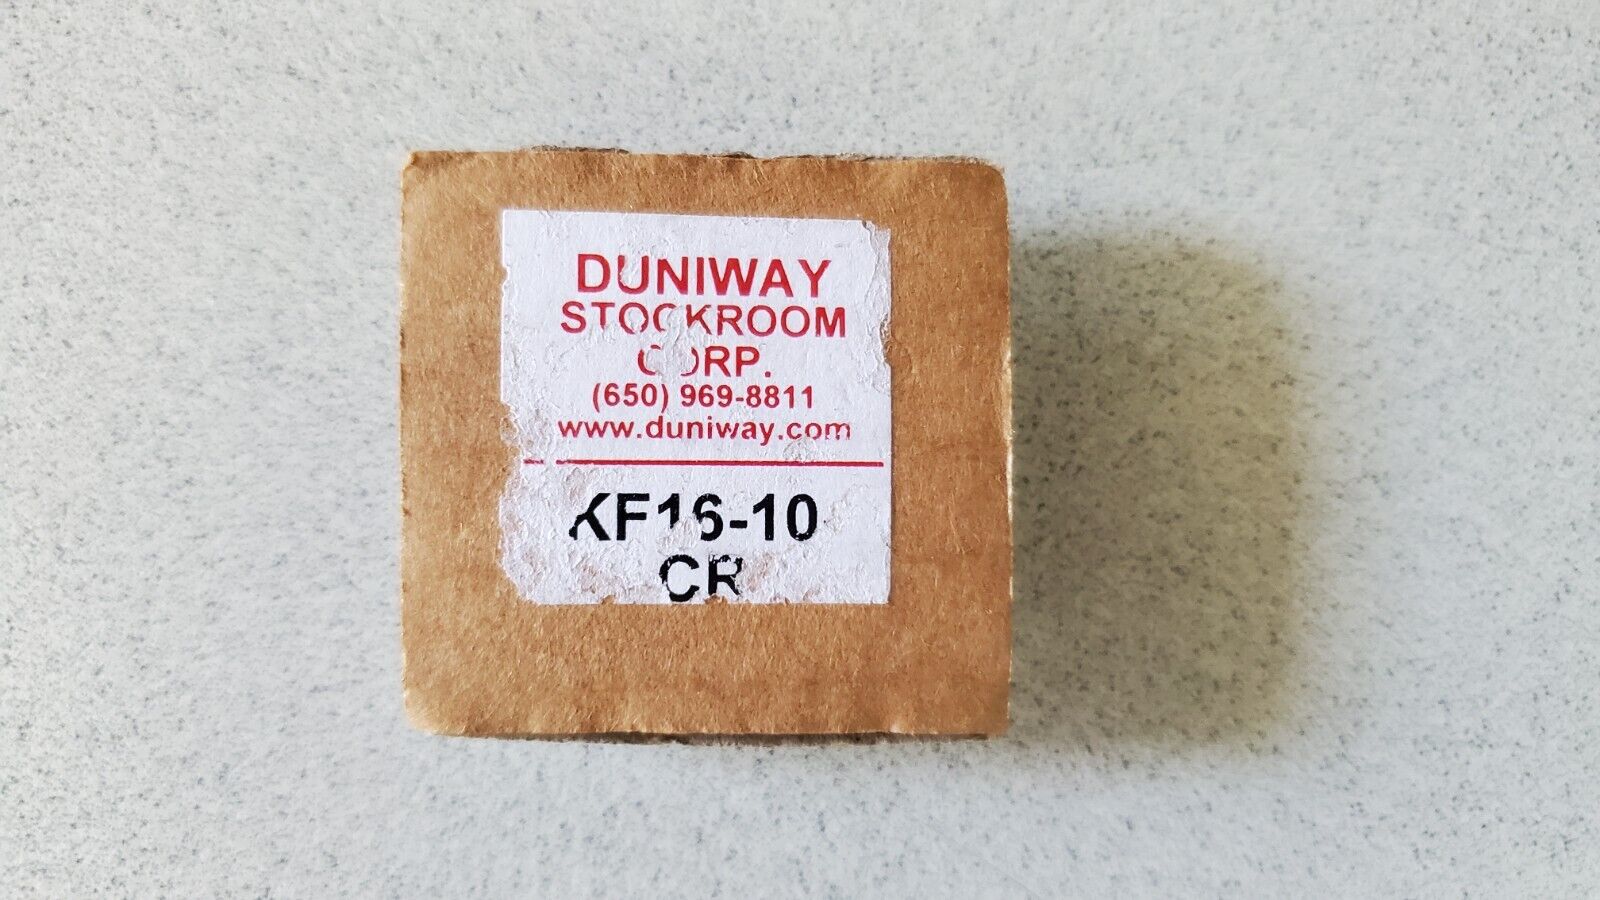 Duniway, Nw16, Center Ring, Kf16-10-cr, Brand New